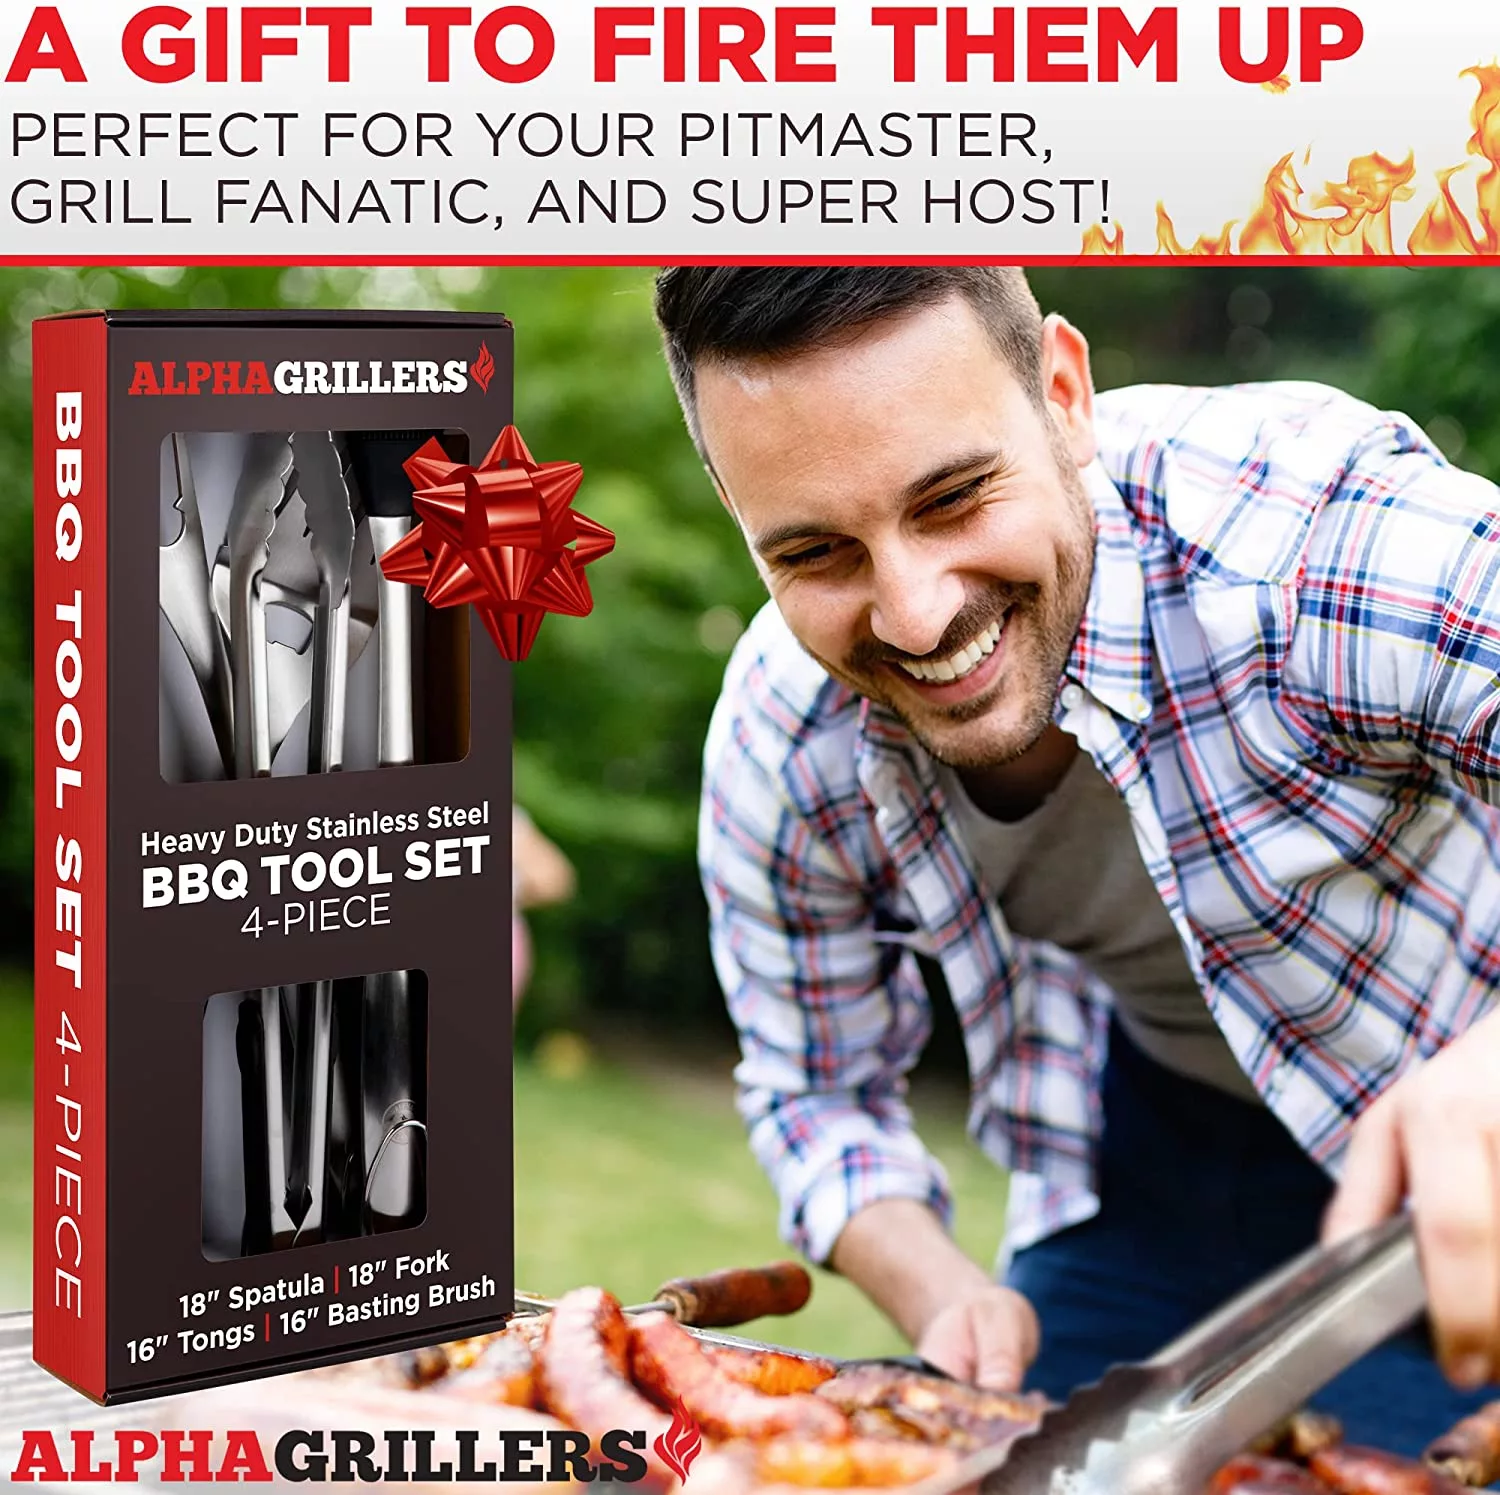 Alpha Grillers Grill Set Heavy Duty BBQ Accessories is a gift to fire anyone up